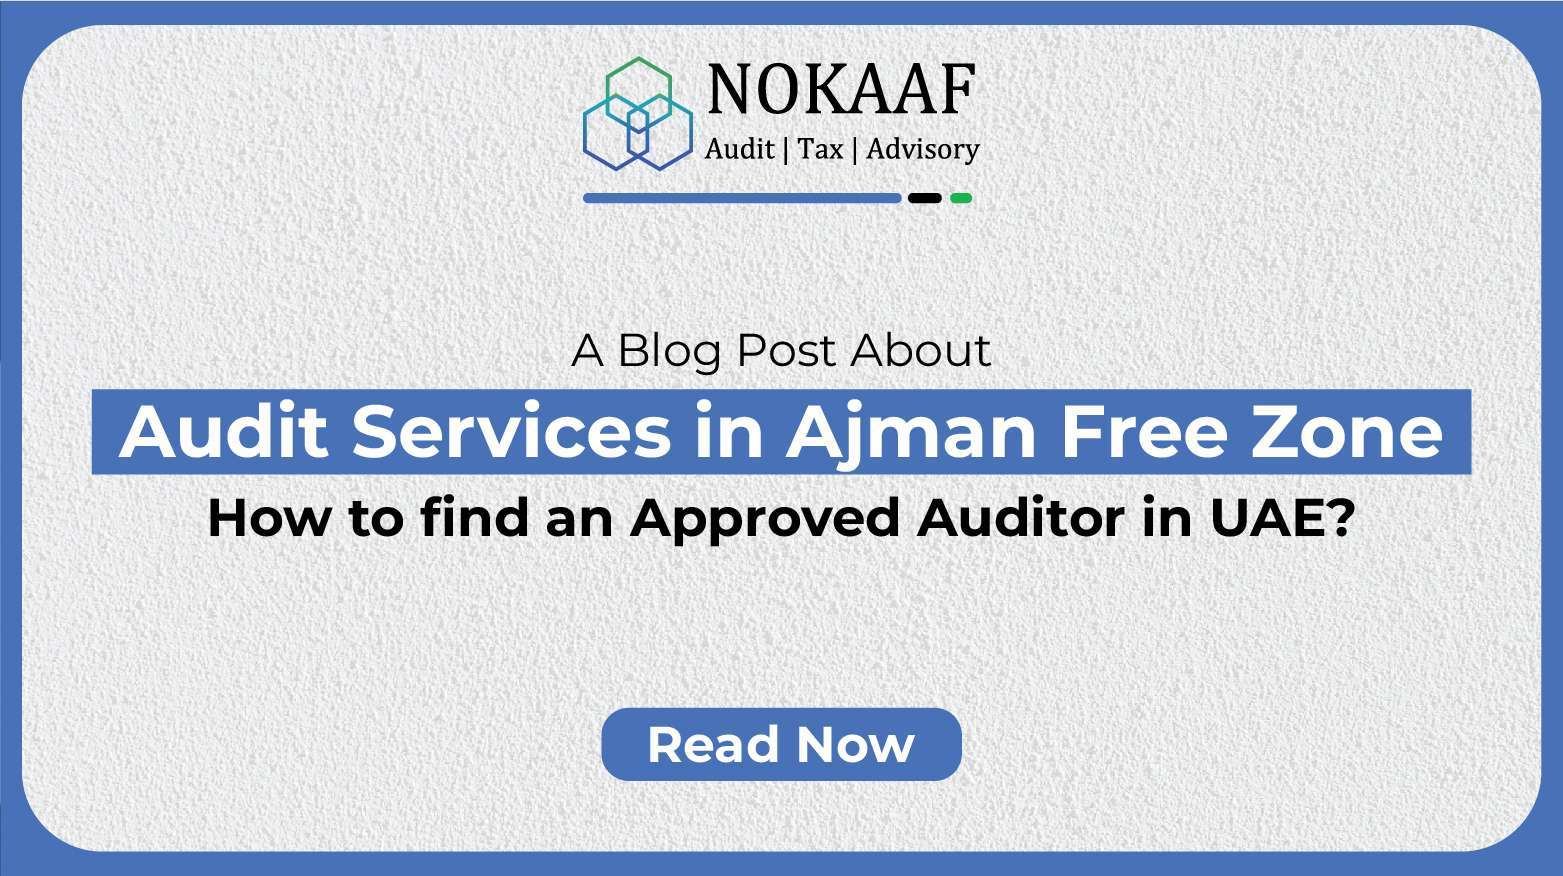 Audit Services in Ajman Free Zone